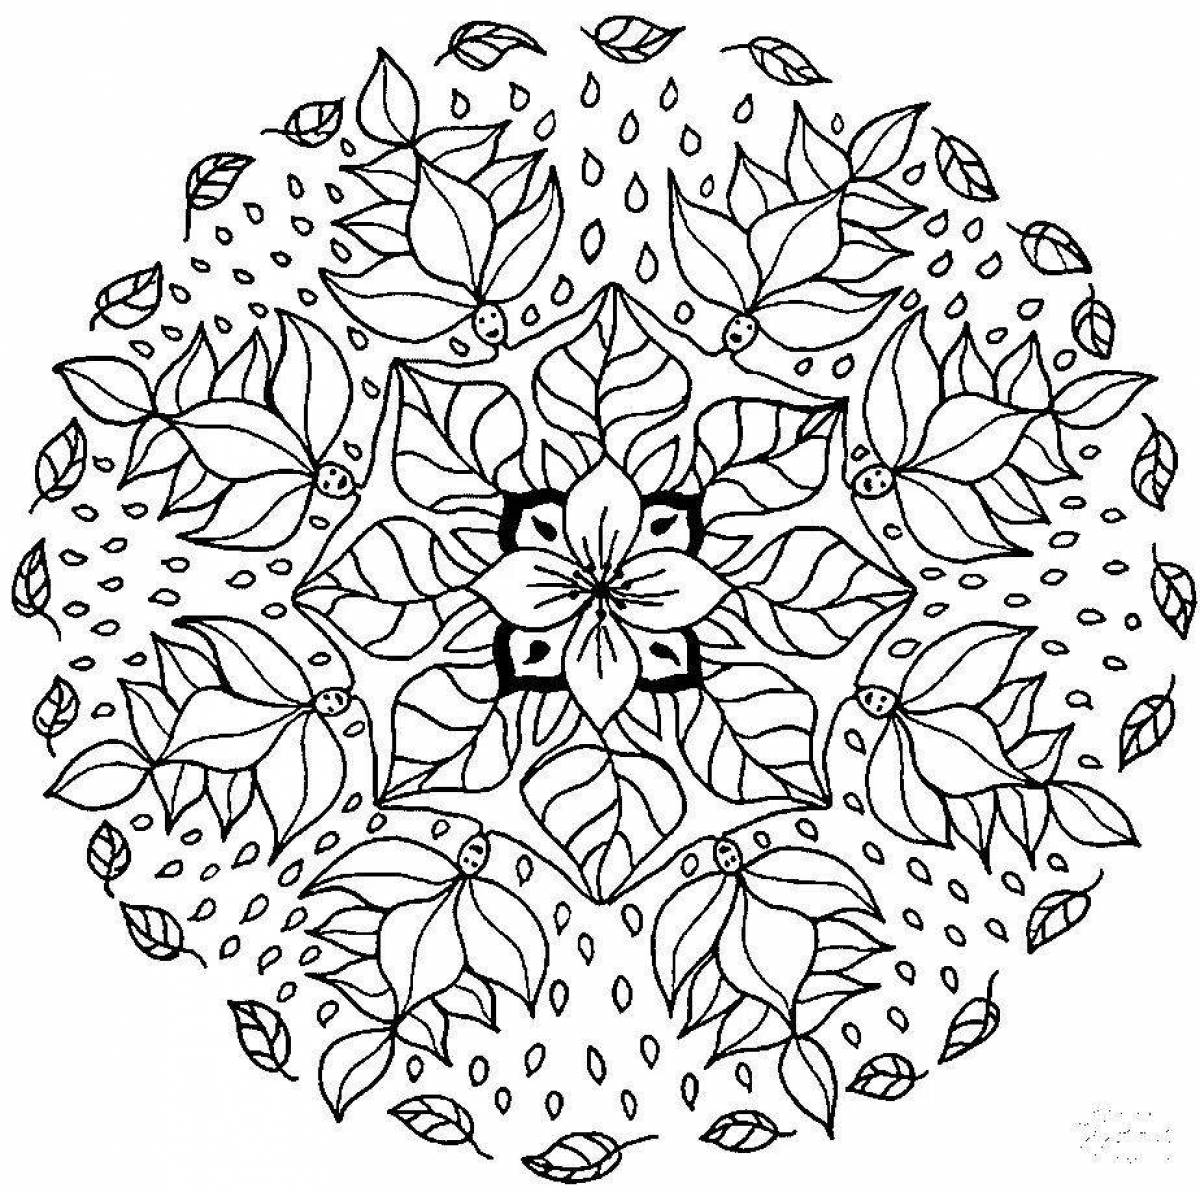 Shining mandala coloring book for children 10 years old